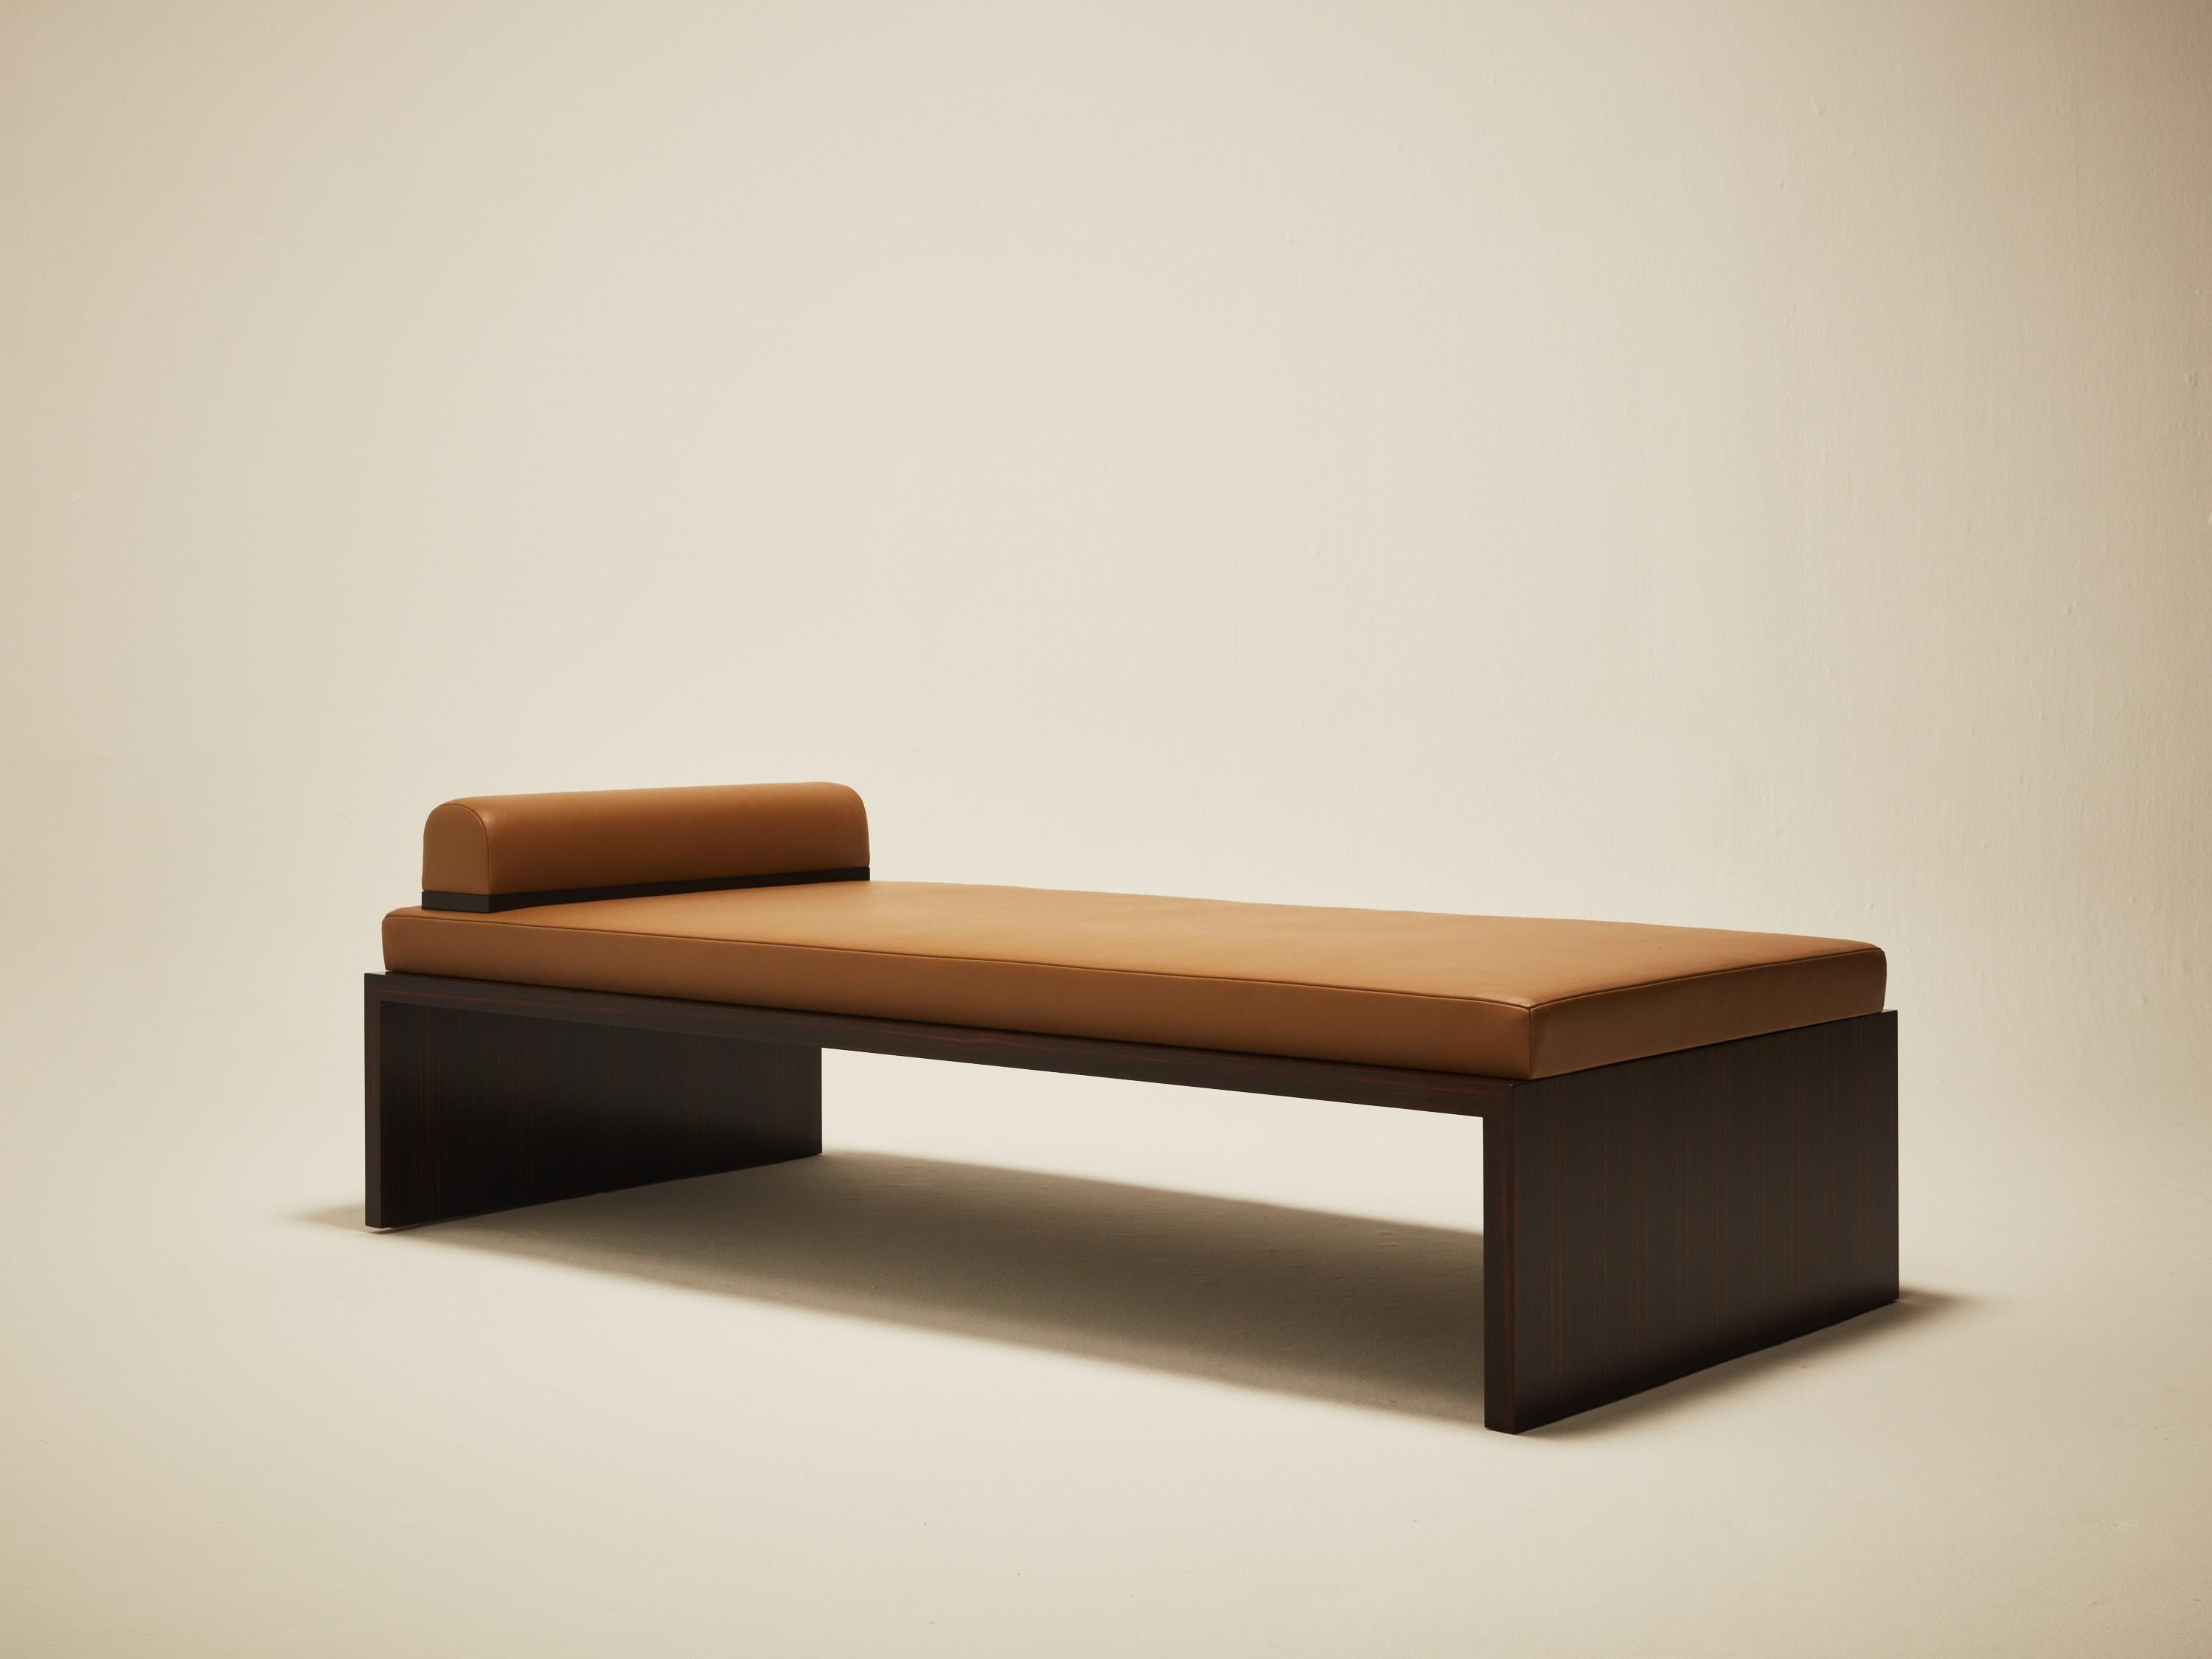 American Continuous Daybed - Hand applied wood veneer & leather upholstery For Sale